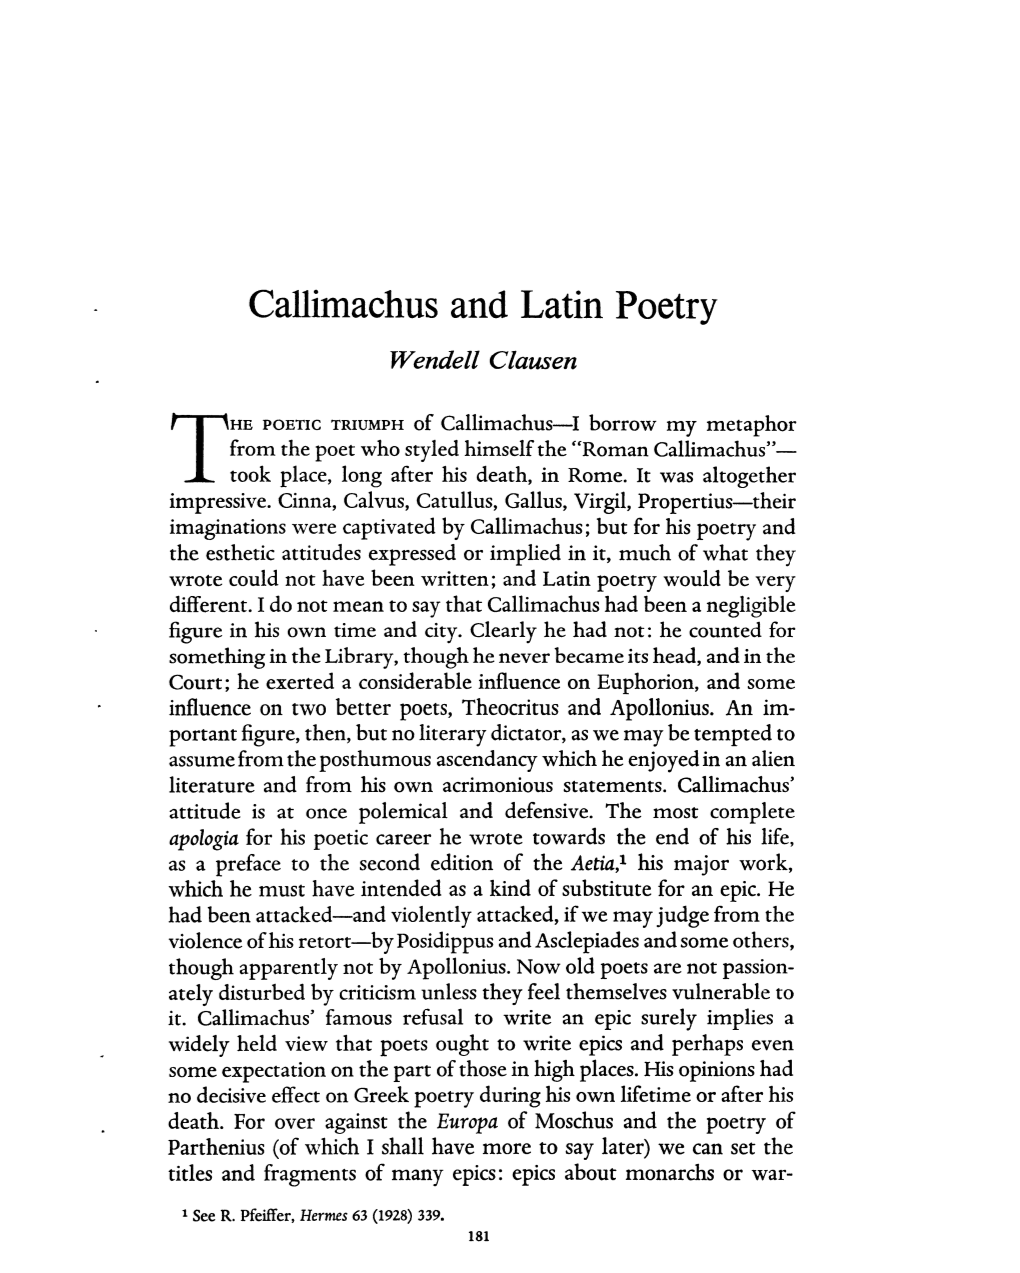 Callimachus and Latin Poetry Clausen, Wendell Greek, Roman and Byzantine Studies; Fall 1964; 5, 3; Proquest Pg